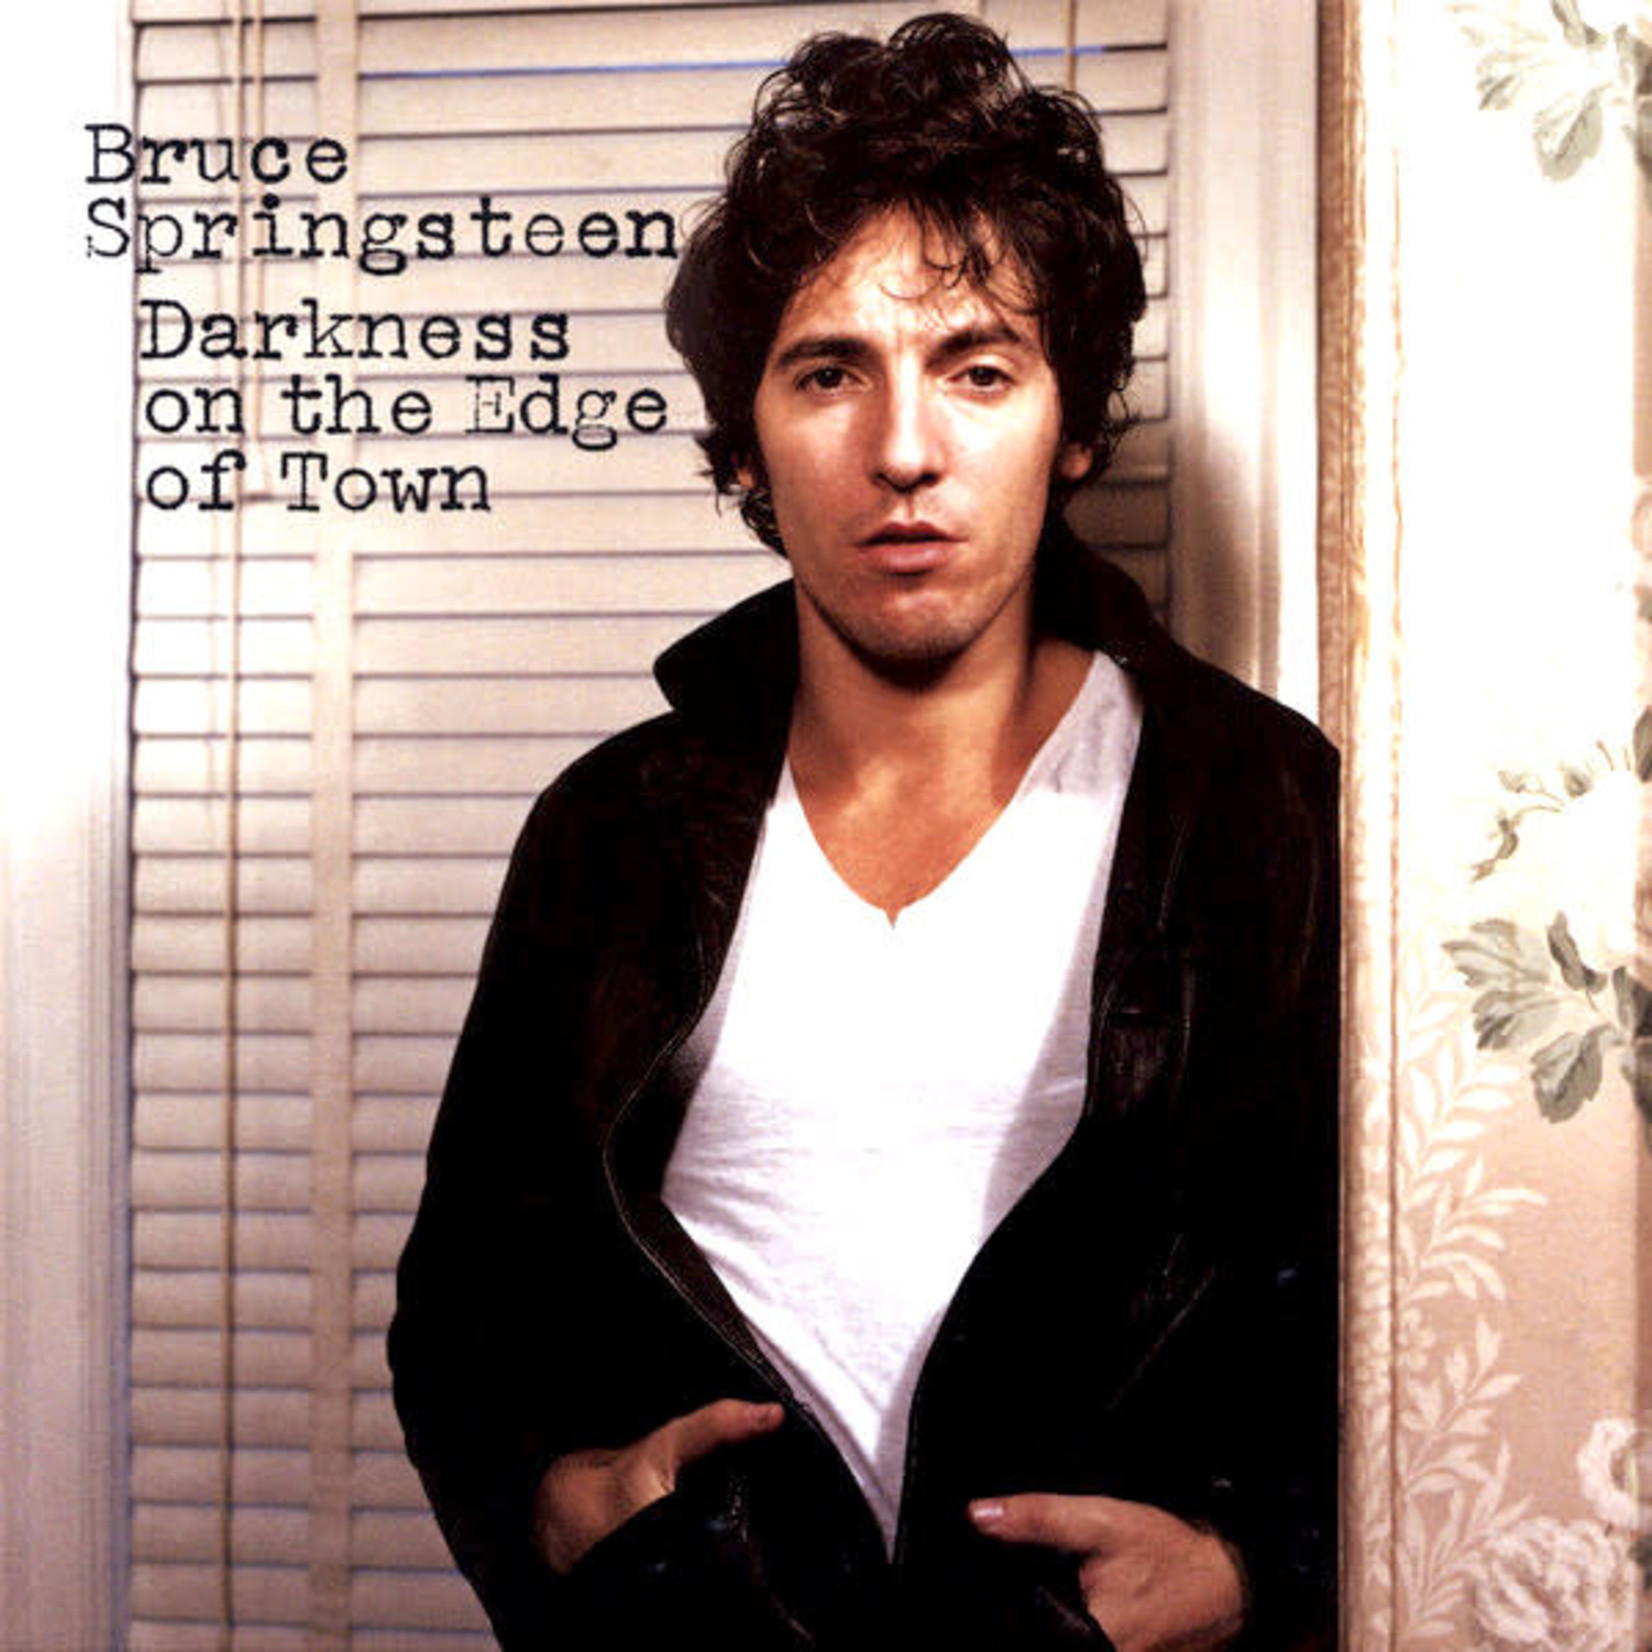 [New] Bruce Springsteen - Darkness on the Edge of Town